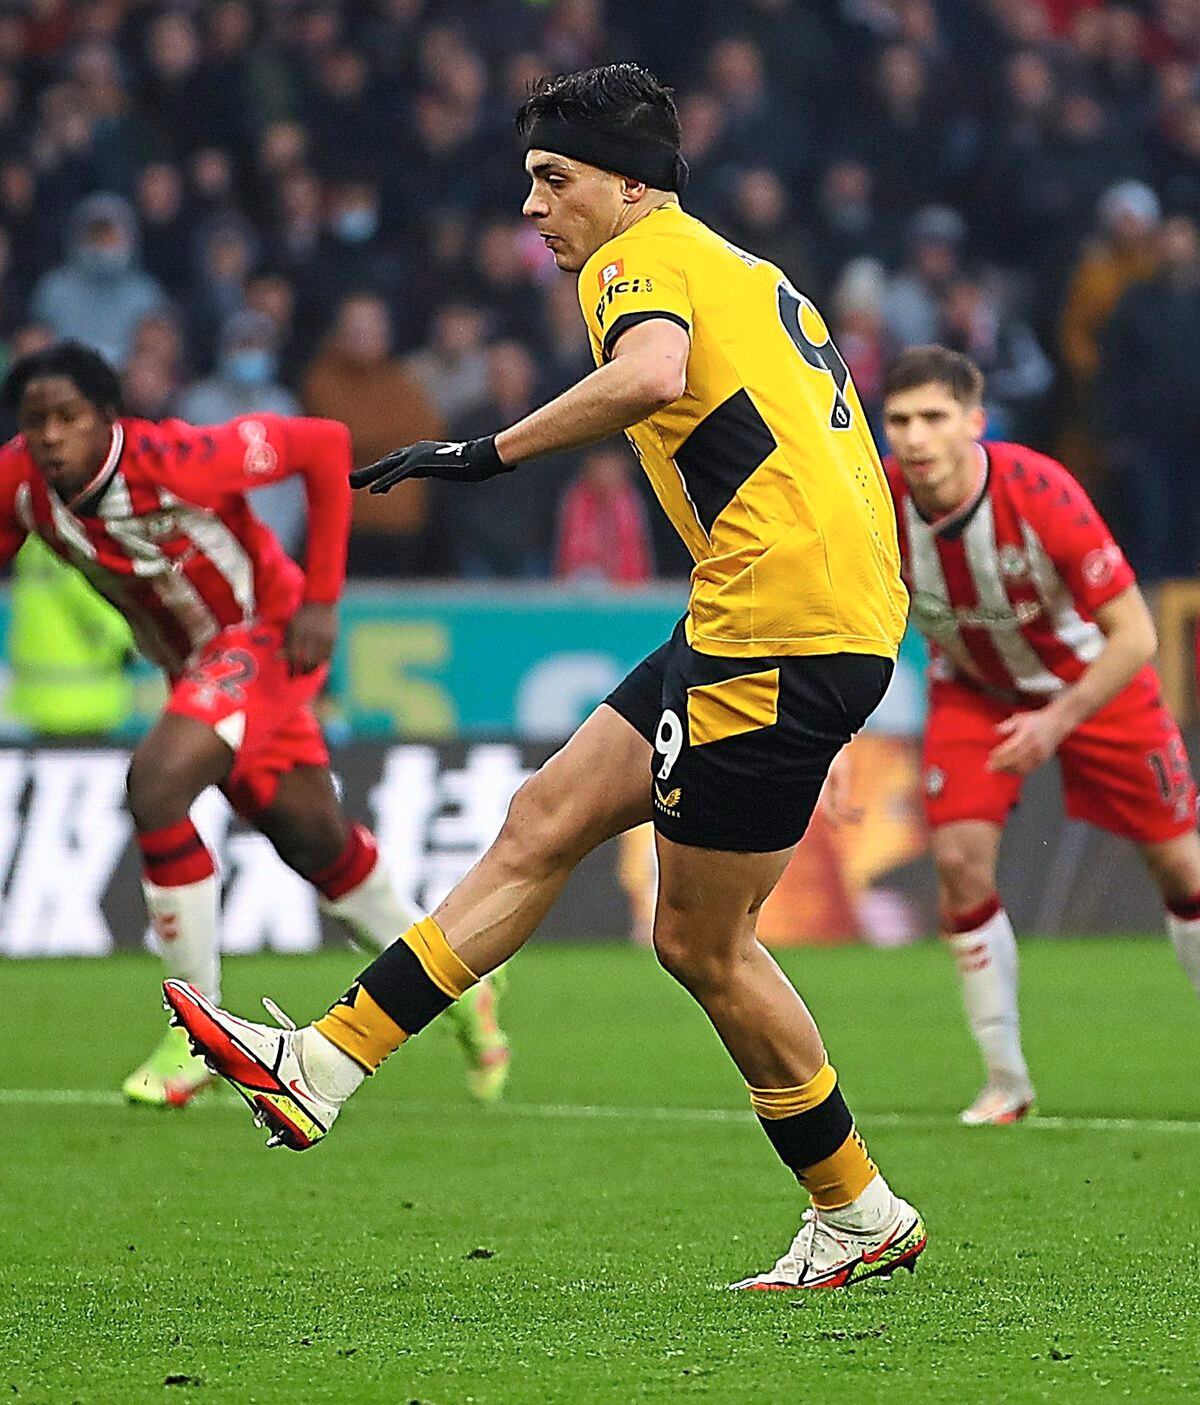 WOLVERHAMPTON, ENGLAND - JANUARY 15: Raul Jimenez of Wolverhampton Wanderers scores their team’s first goal from the penalty spot during the Premier League match between Wolverhampton Wanderers and Southampton at Molineux on January 15, 2022 in Wolverhampton, England. (Photo by Jack Thomas - WWFC/Wolves via Getty Images).